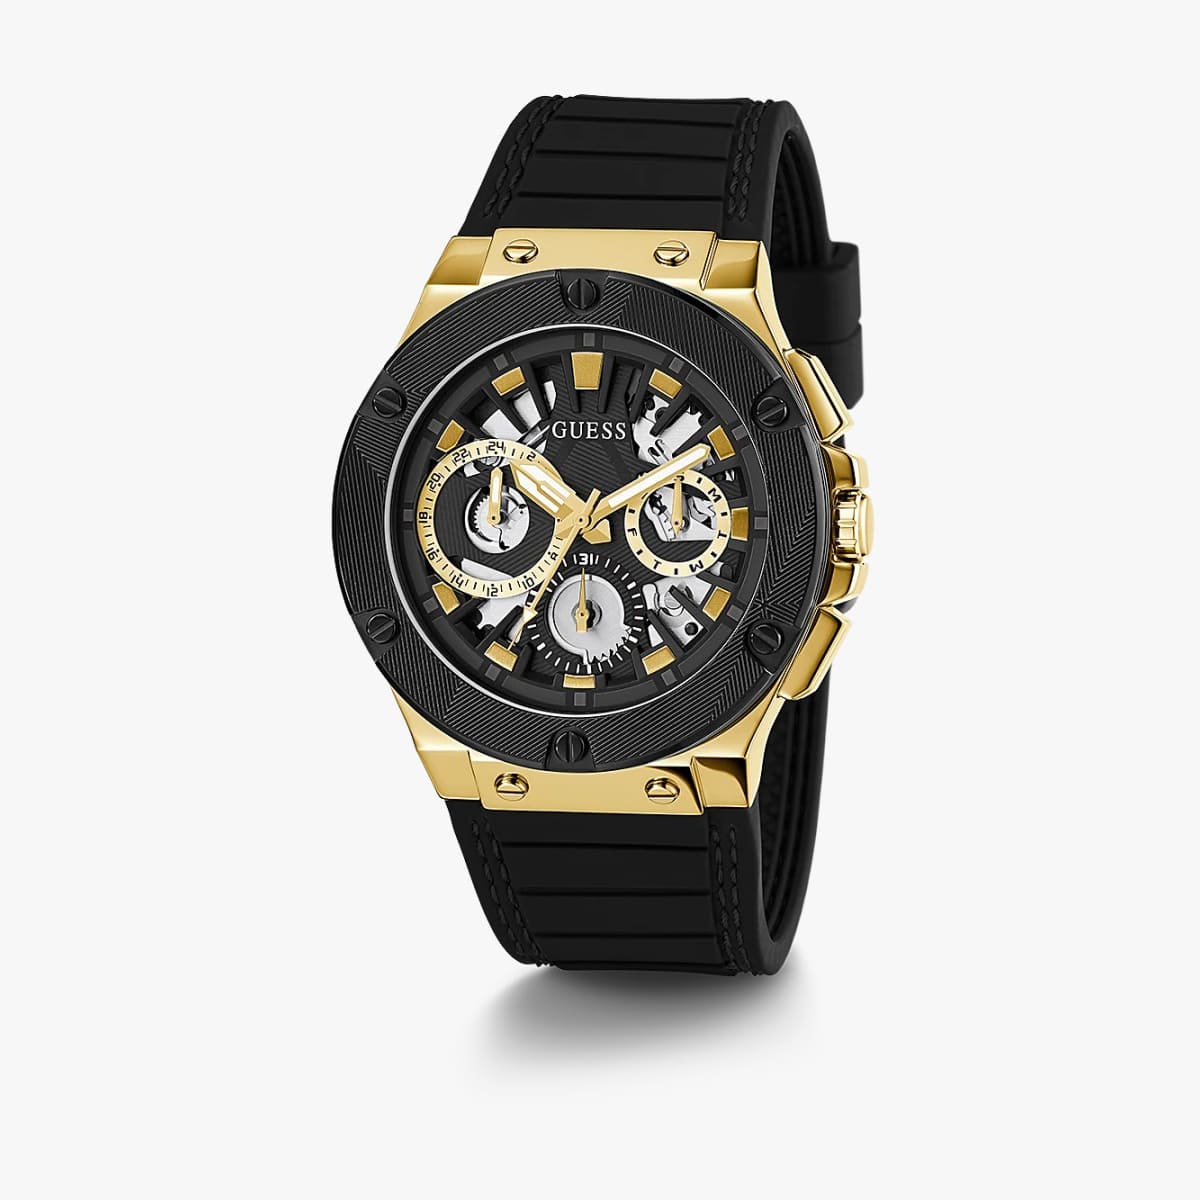 MONTRE GUESS HOMME M.FONCTION SILICONE